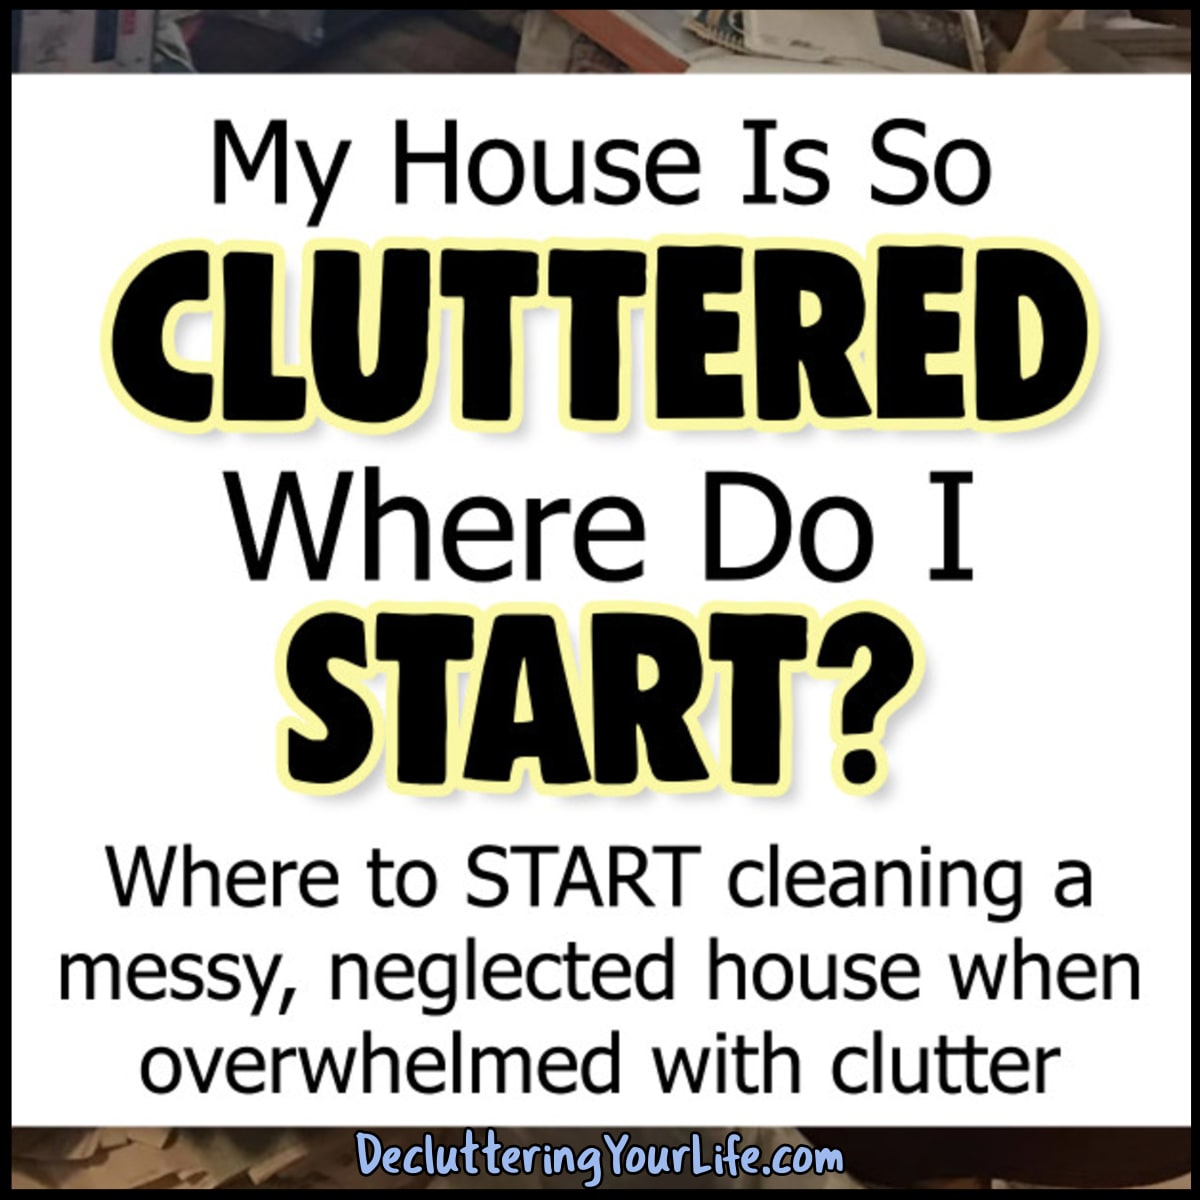 Where to START when your house is a cluttered mess - My House Is So CLUTTERED and I Don't Know Where To START and I'm paralyzed by messy house and clutter! Where to start cleaning a clutter house when overwhelmed